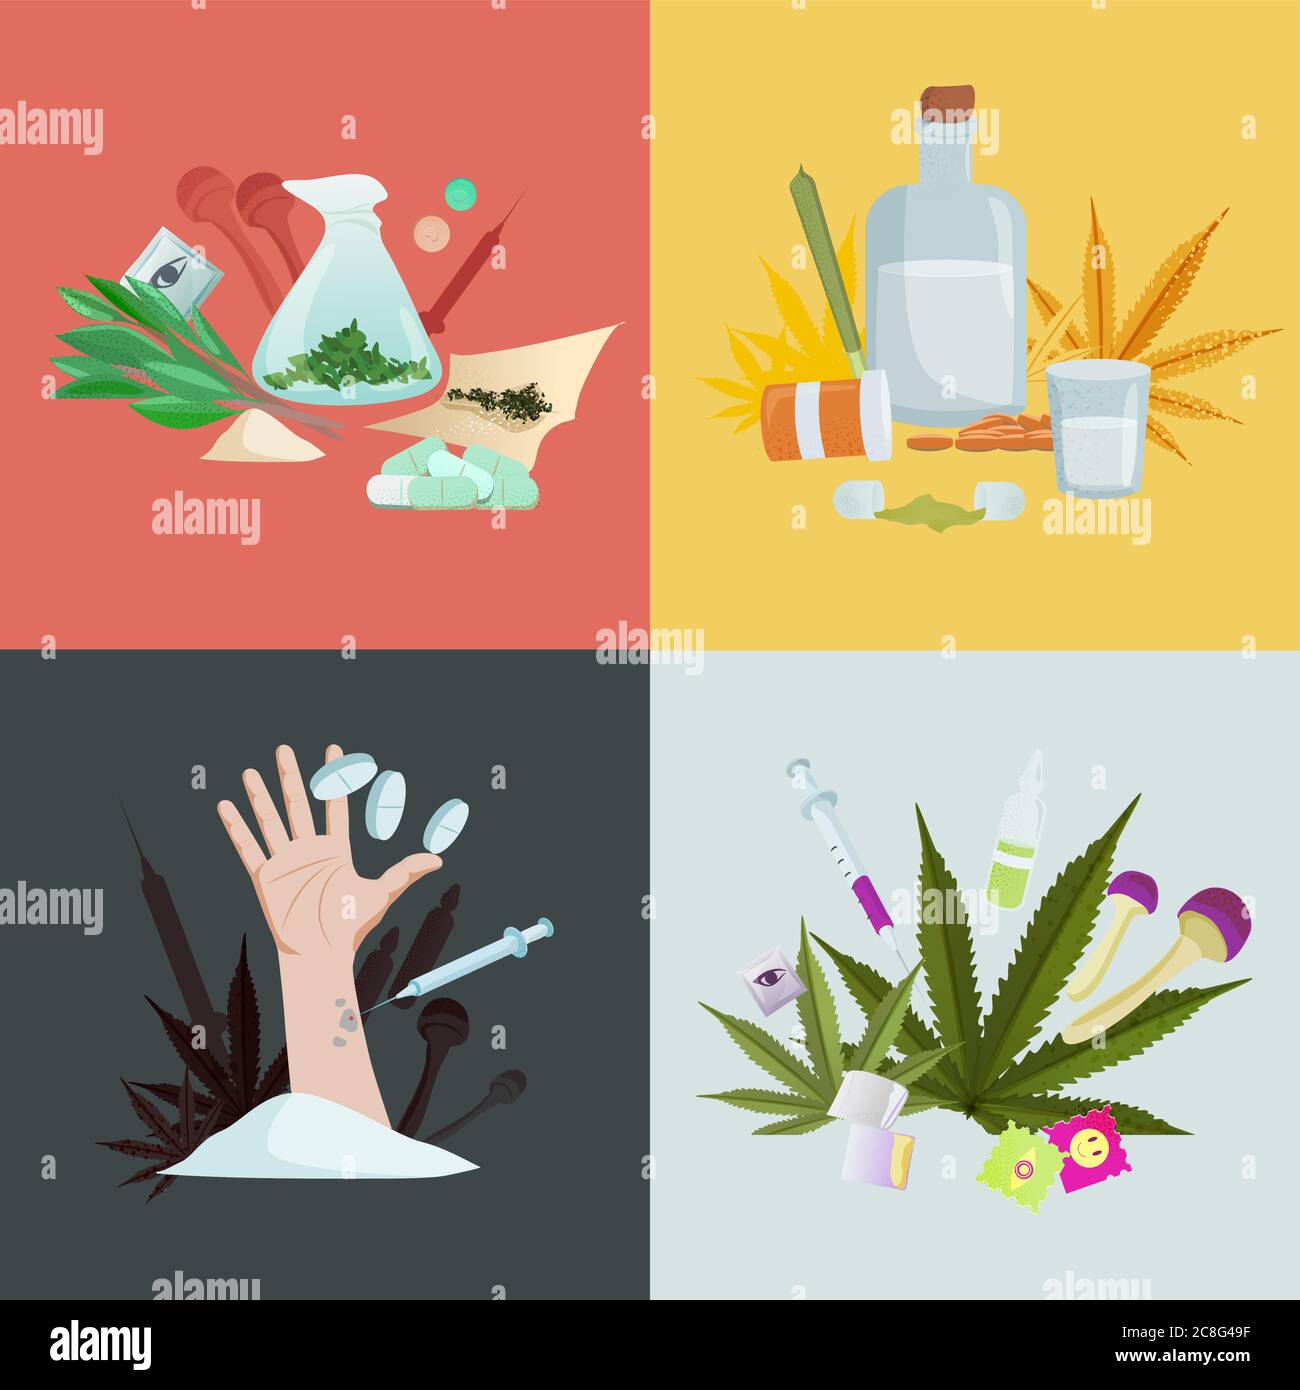 Drug addiction illustration set. Ready to use organic drugs mescaline extract bunch of salvia leaves. Stock Vector